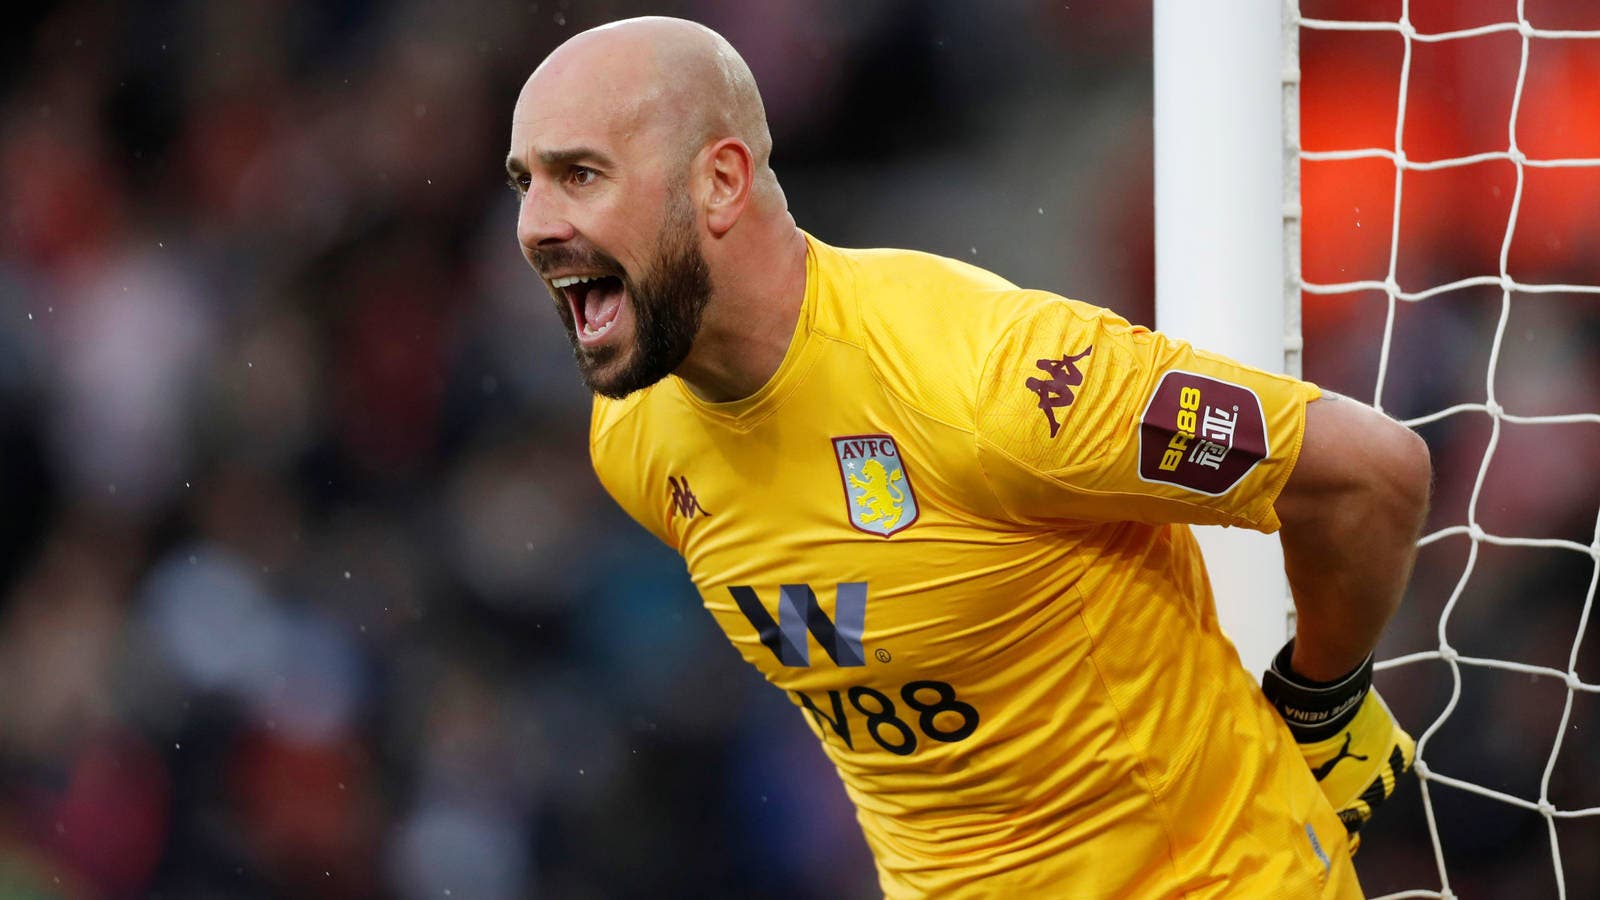 Villarreal CF is behind RC Celta's failed attempt with Pepe Reina
